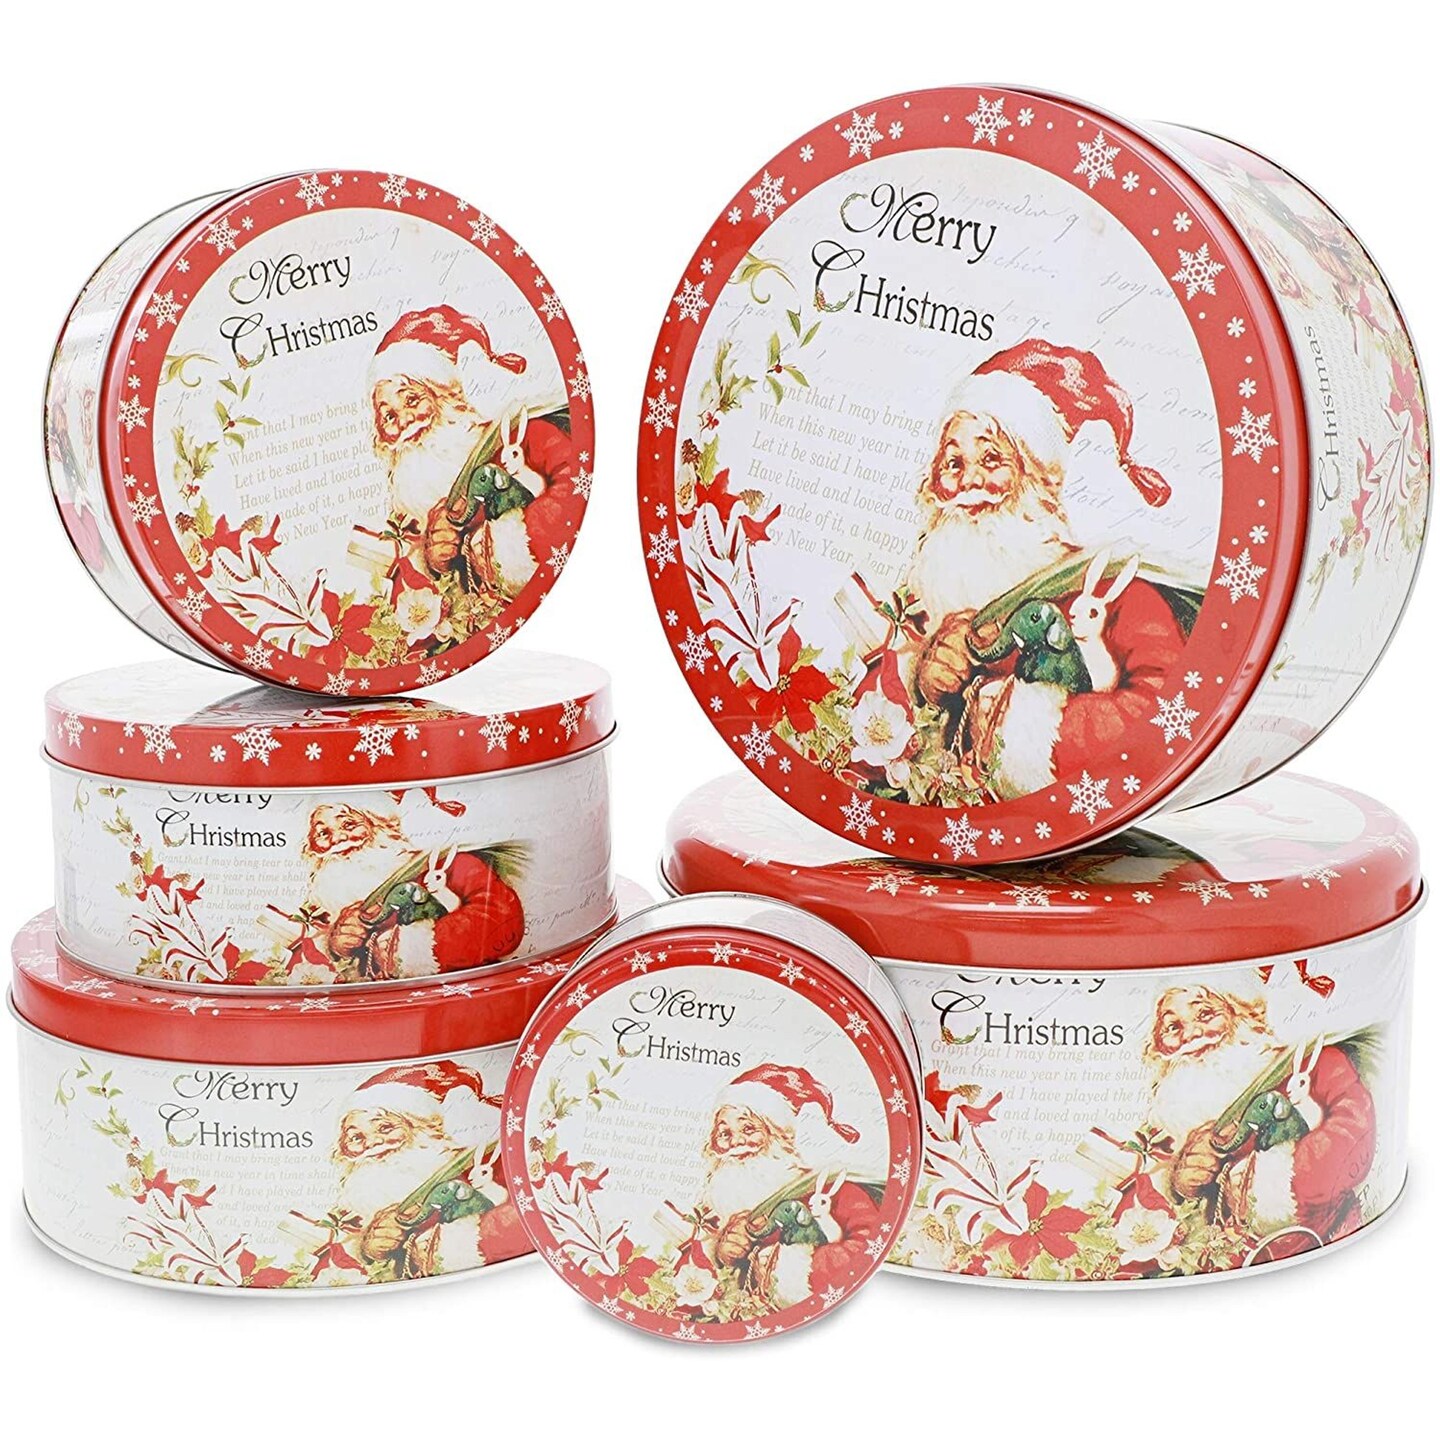 Christmas Cookie Tins, Round Nesting Storage Containers for